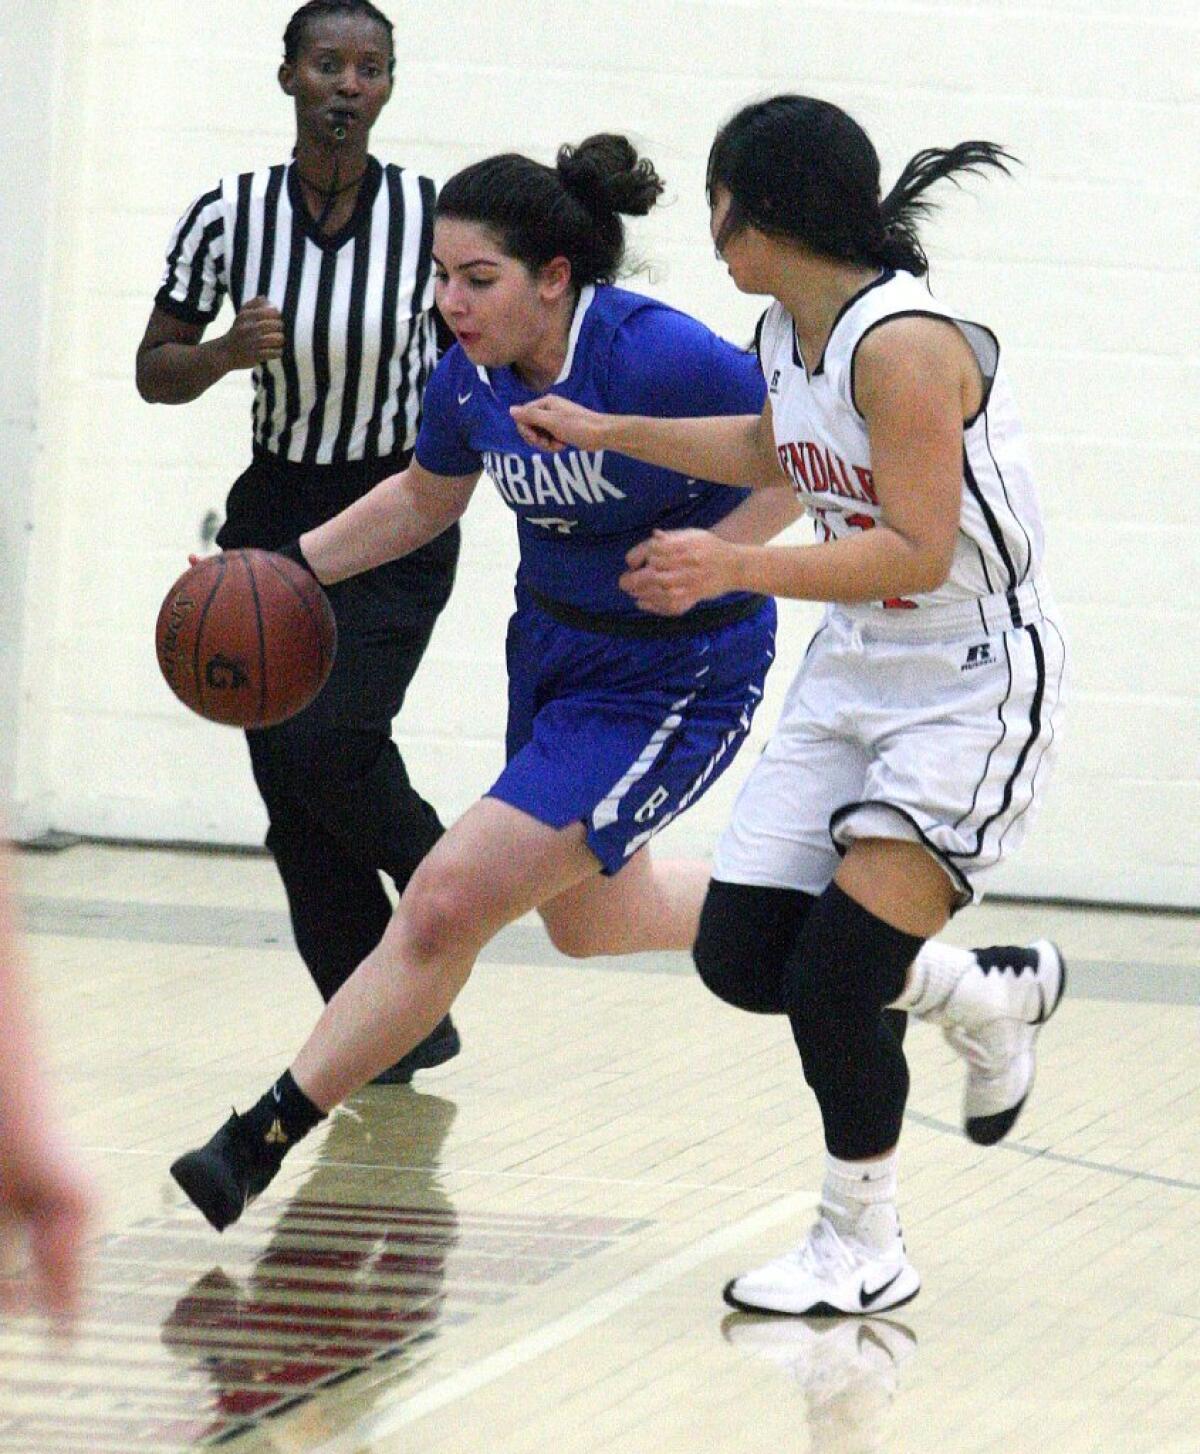 Burbank's Osanna Tirityan brings the ball up court against Glendale's Claire Yanai in a Pacific League girls' basketball game at Glendale on Monday.